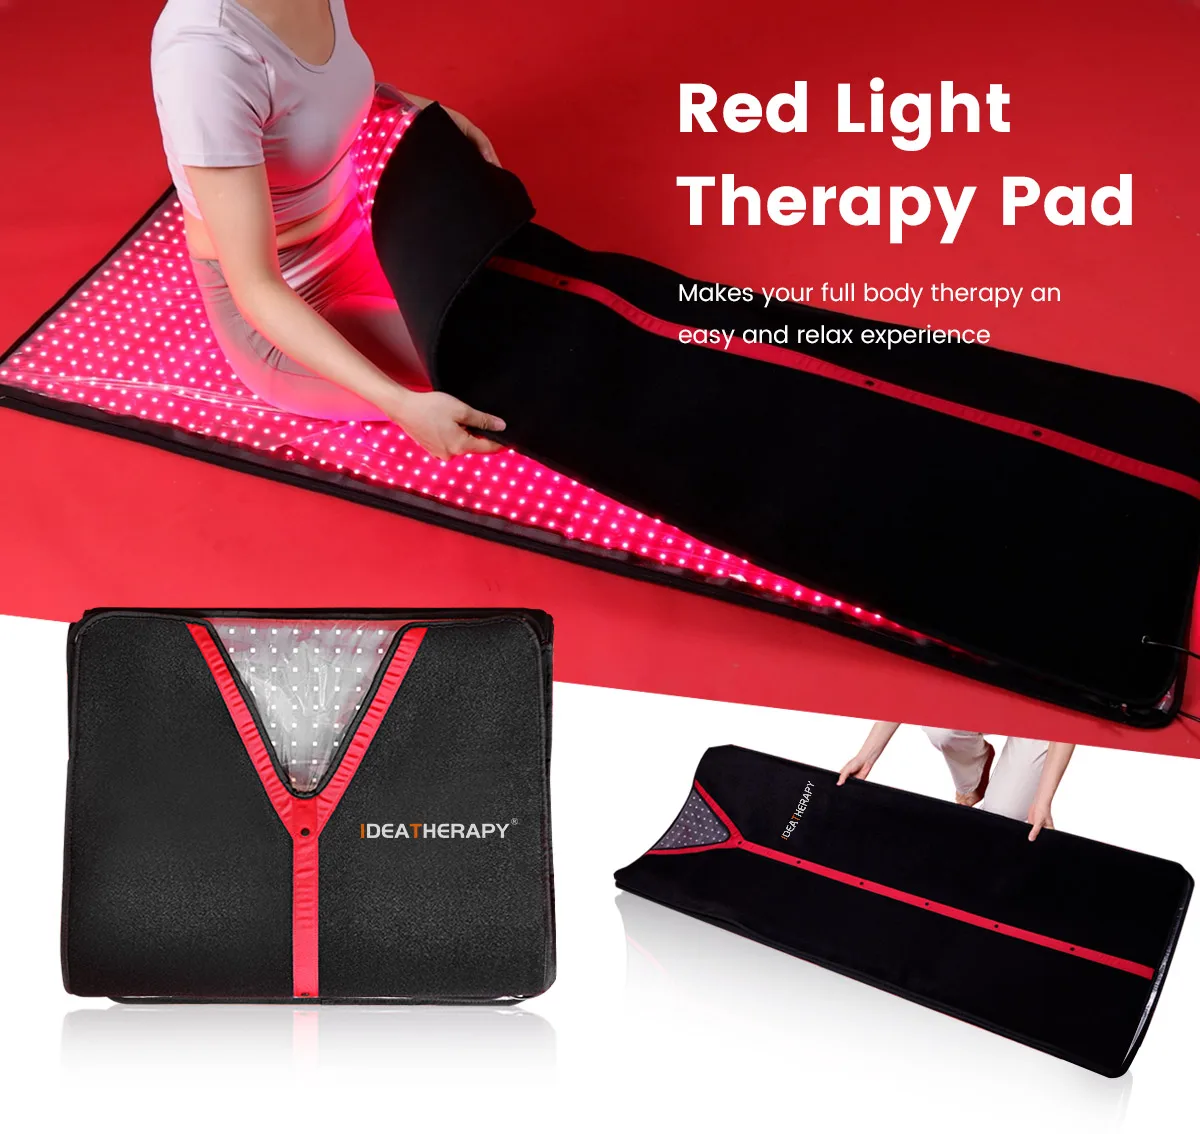 Ideatherapy Led Light Therapy Sleeping Bag Largest Size Red Light Bed Red Infrared Light Therapy